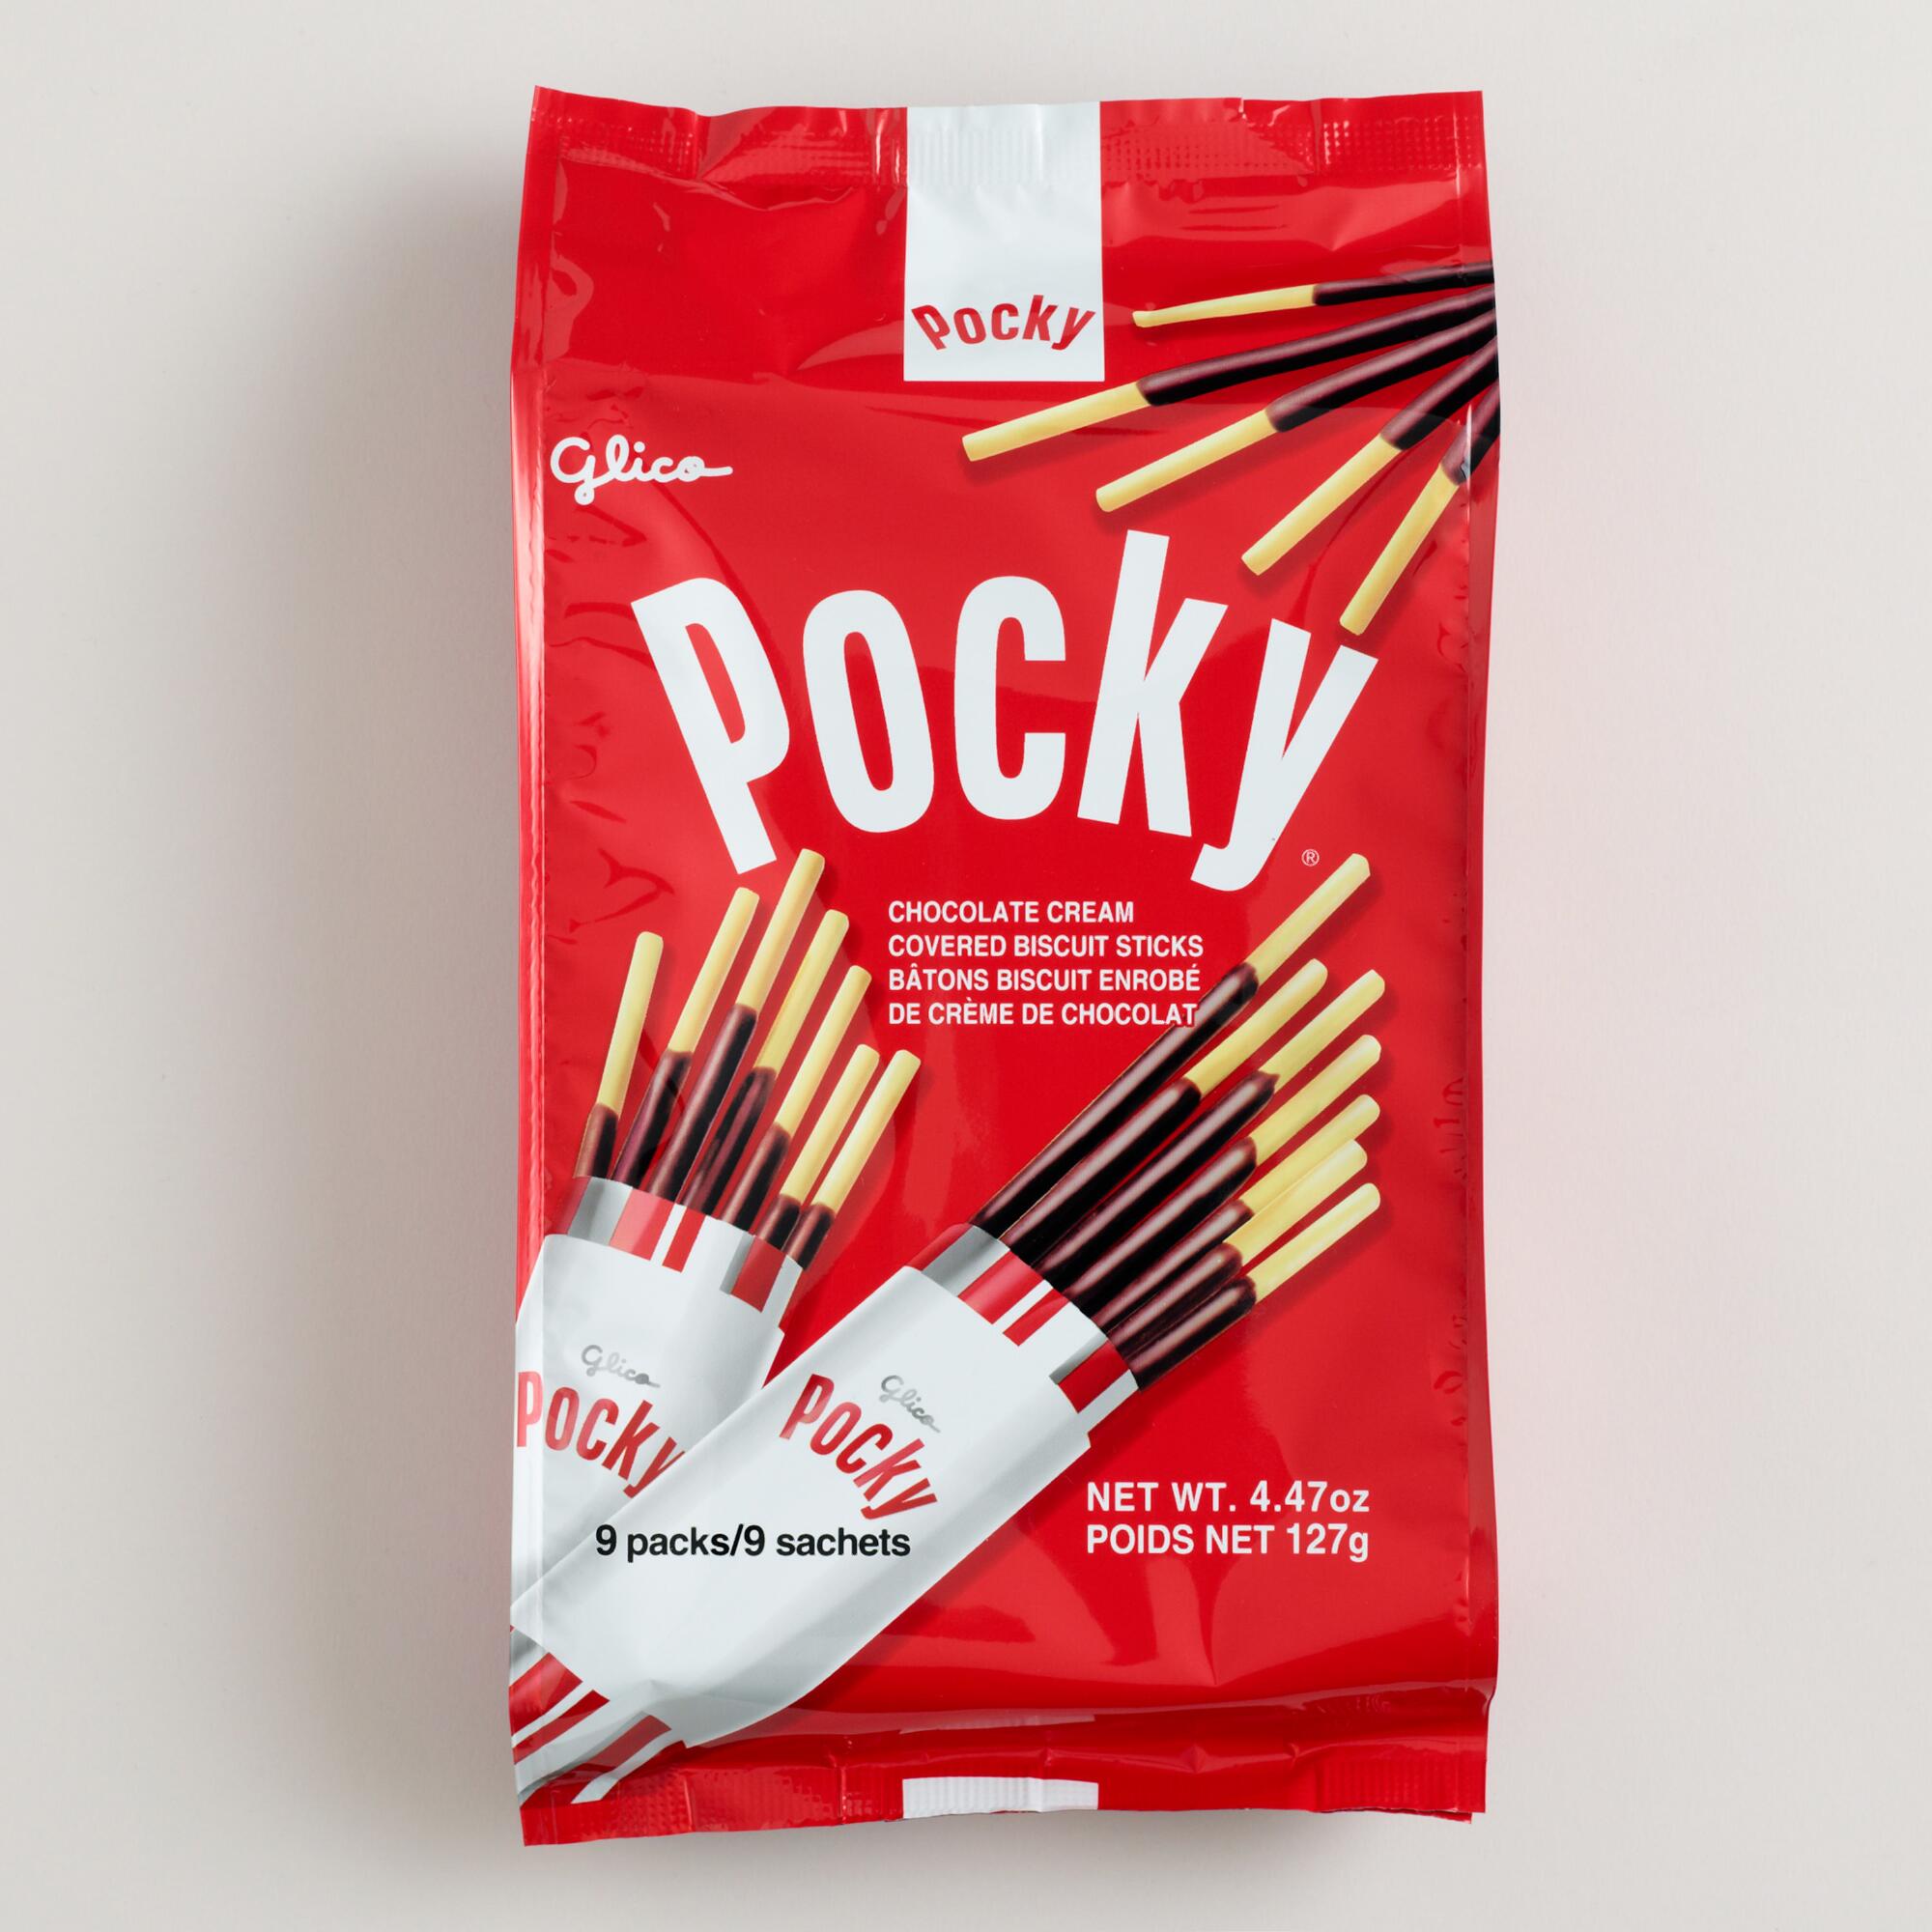 Nice Images Collection: Pocky Desktop Wallpapers